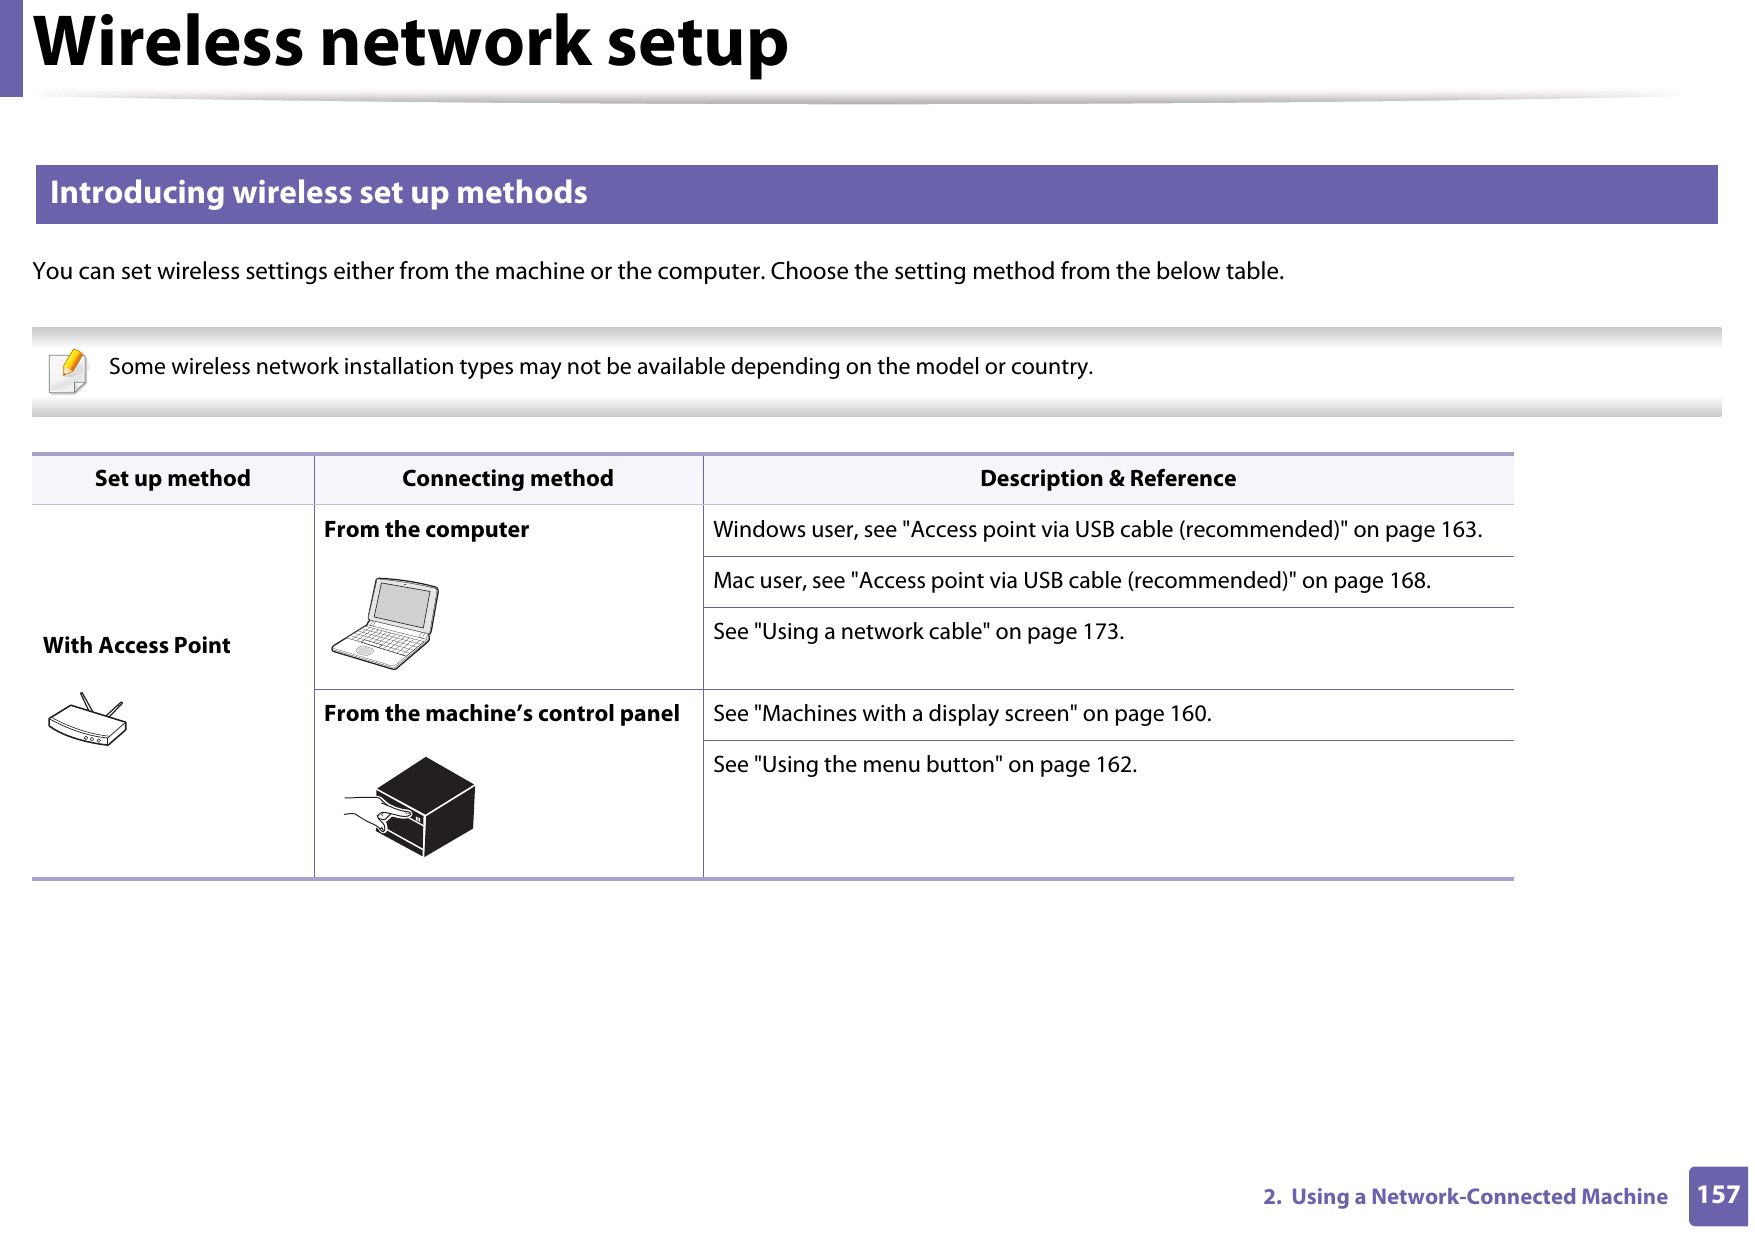 Wireless network setup1572.  Using a Network-Connected Machine13 Introducing wireless set up methodsYou can set wireless settings either from the machine or the computer. Choose the setting method from the below table. Some wireless network installation types may not be available depending on the model or country.  Set up method Connecting method Description &amp; ReferenceWith Access PointFrom the computer Windows user, see &quot;Access point via USB cable (recommended)&quot; on page 163.Mac user, see &quot;Access point via USB cable (recommended)&quot; on page 168.See &quot;Using a network cable&quot; on page 173.From the machine’s control panel See &quot;Machines with a display screen&quot; on page 160.See &quot;Using the menu button&quot; on page 162.